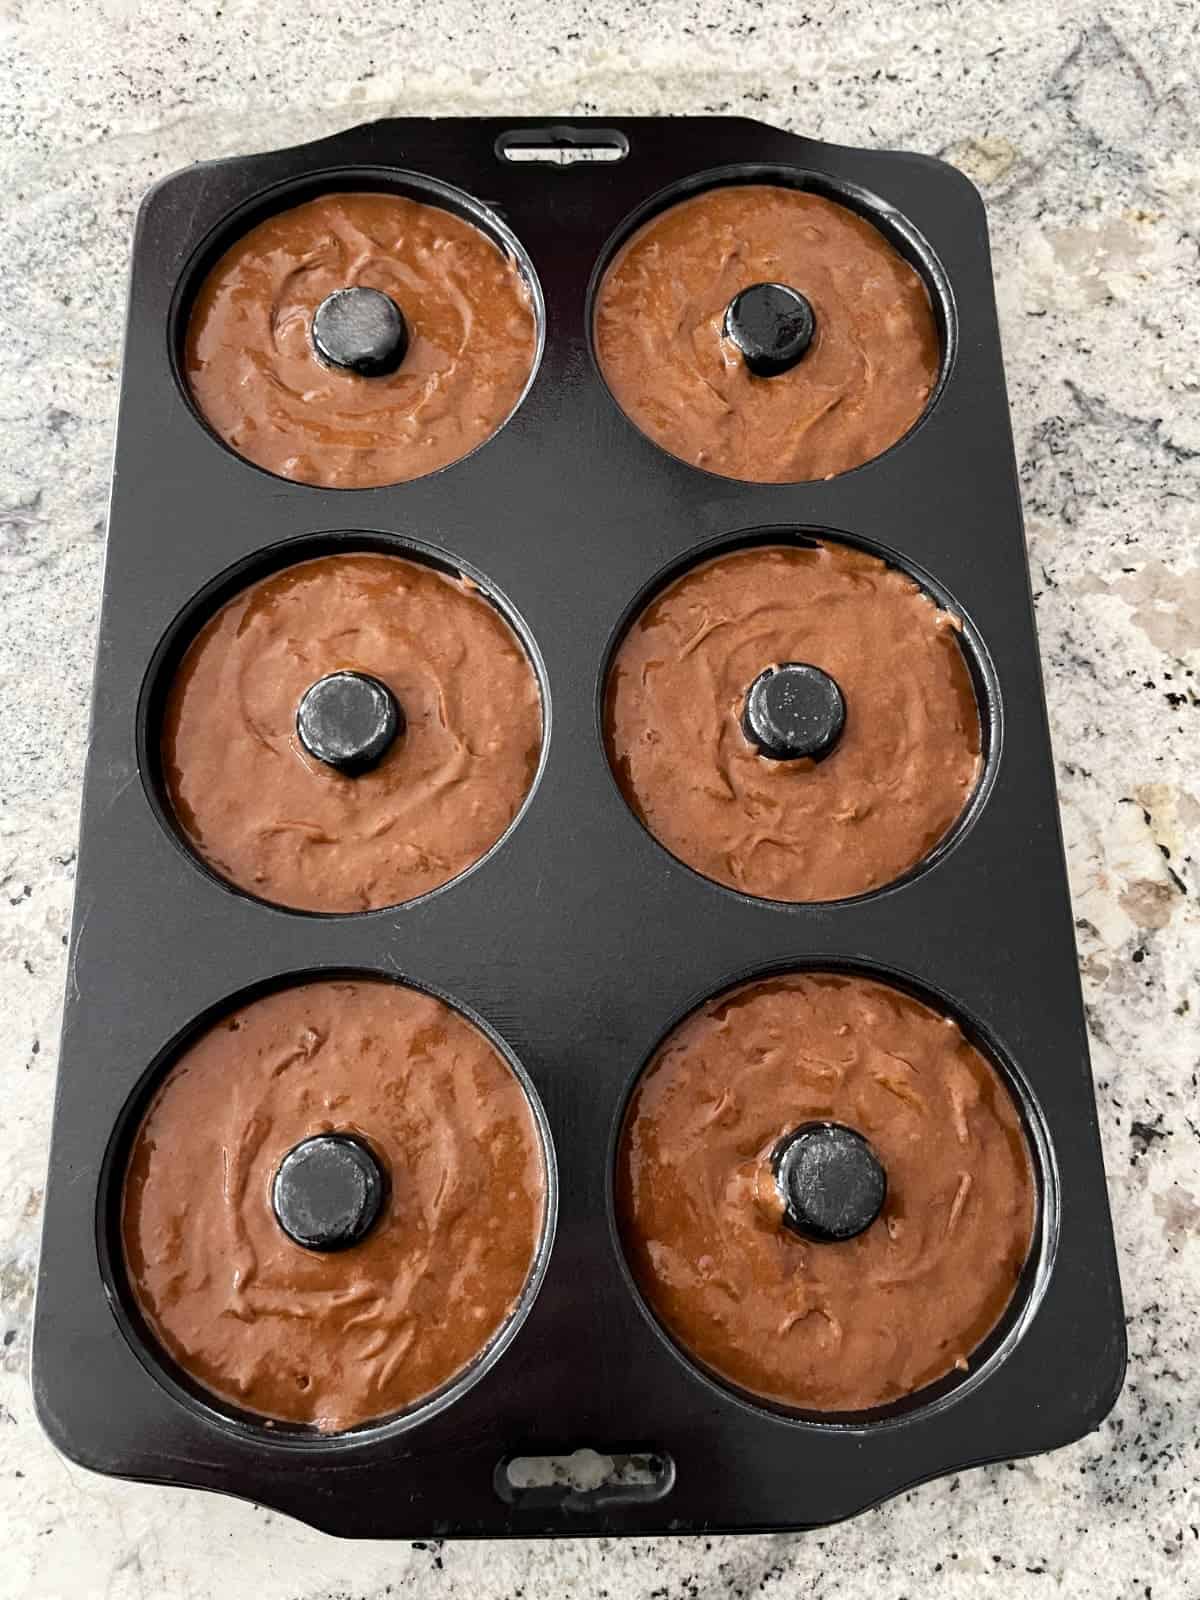 Unbaked mint chocolate donuts in baking pan.